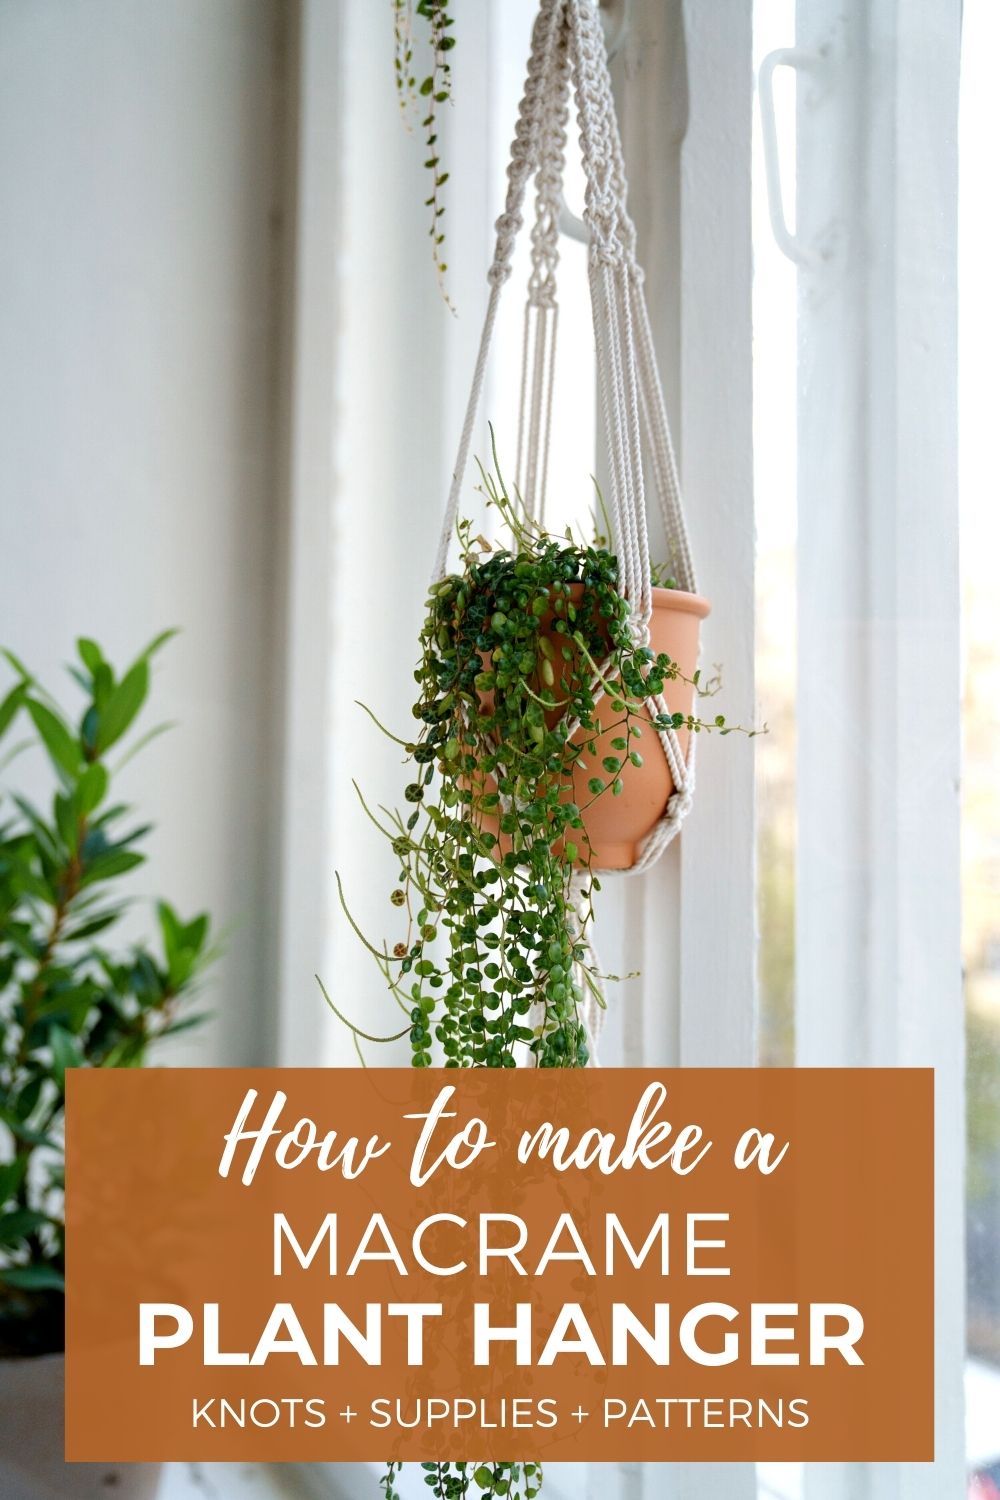 How to Make a Macrame Plant Hanger – Best Tips for Beginners